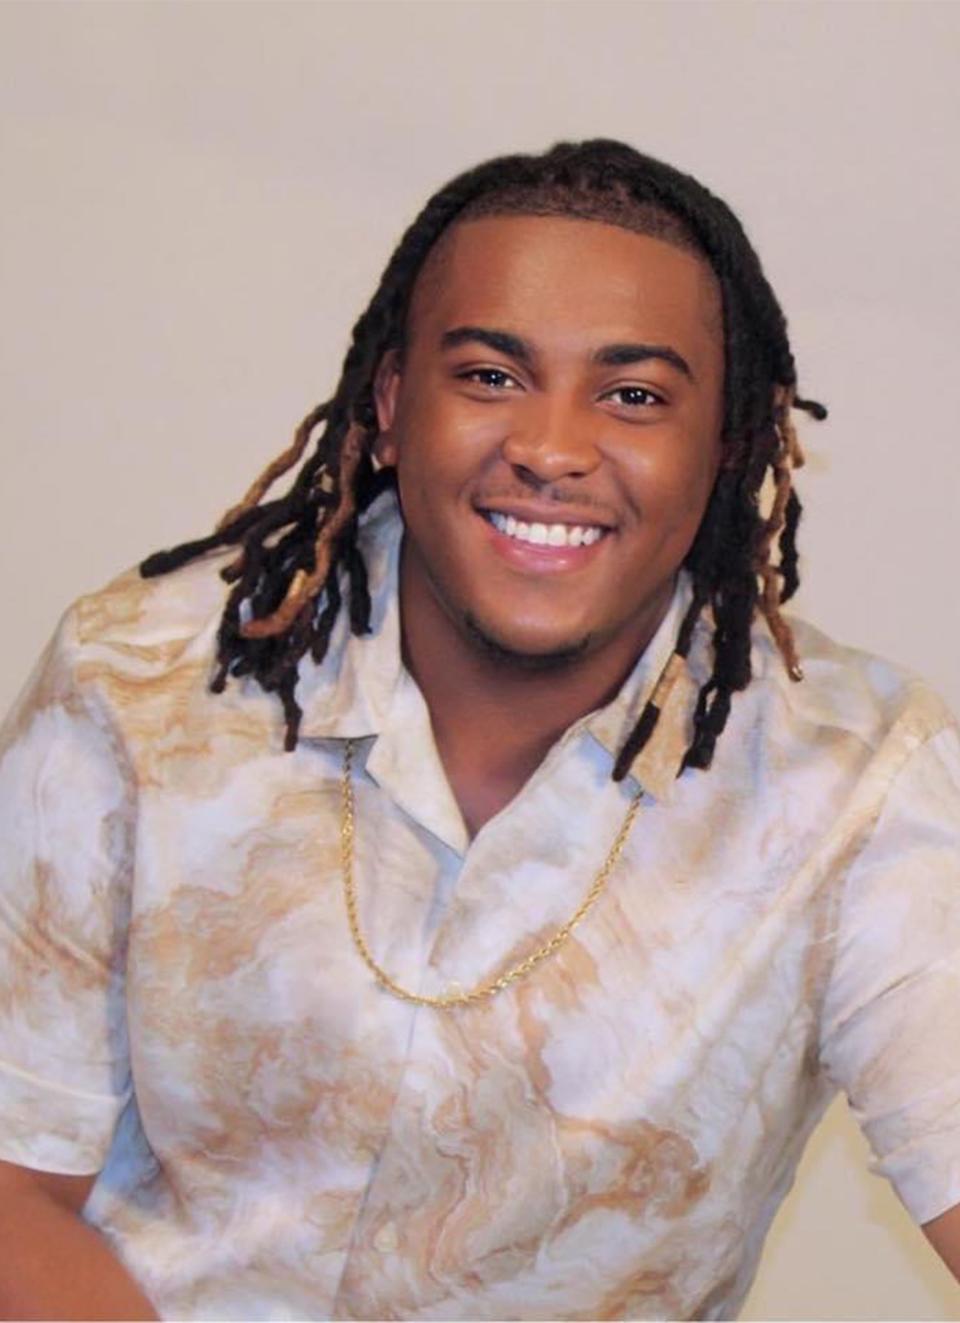 Joshua Rogers, the 2012 season 5 winner on BET’s “Sunday Best," plays a mental health counselor in the stage play "Silent Screams," on Aug. 5 at the Davis Theatre in Montgomery.